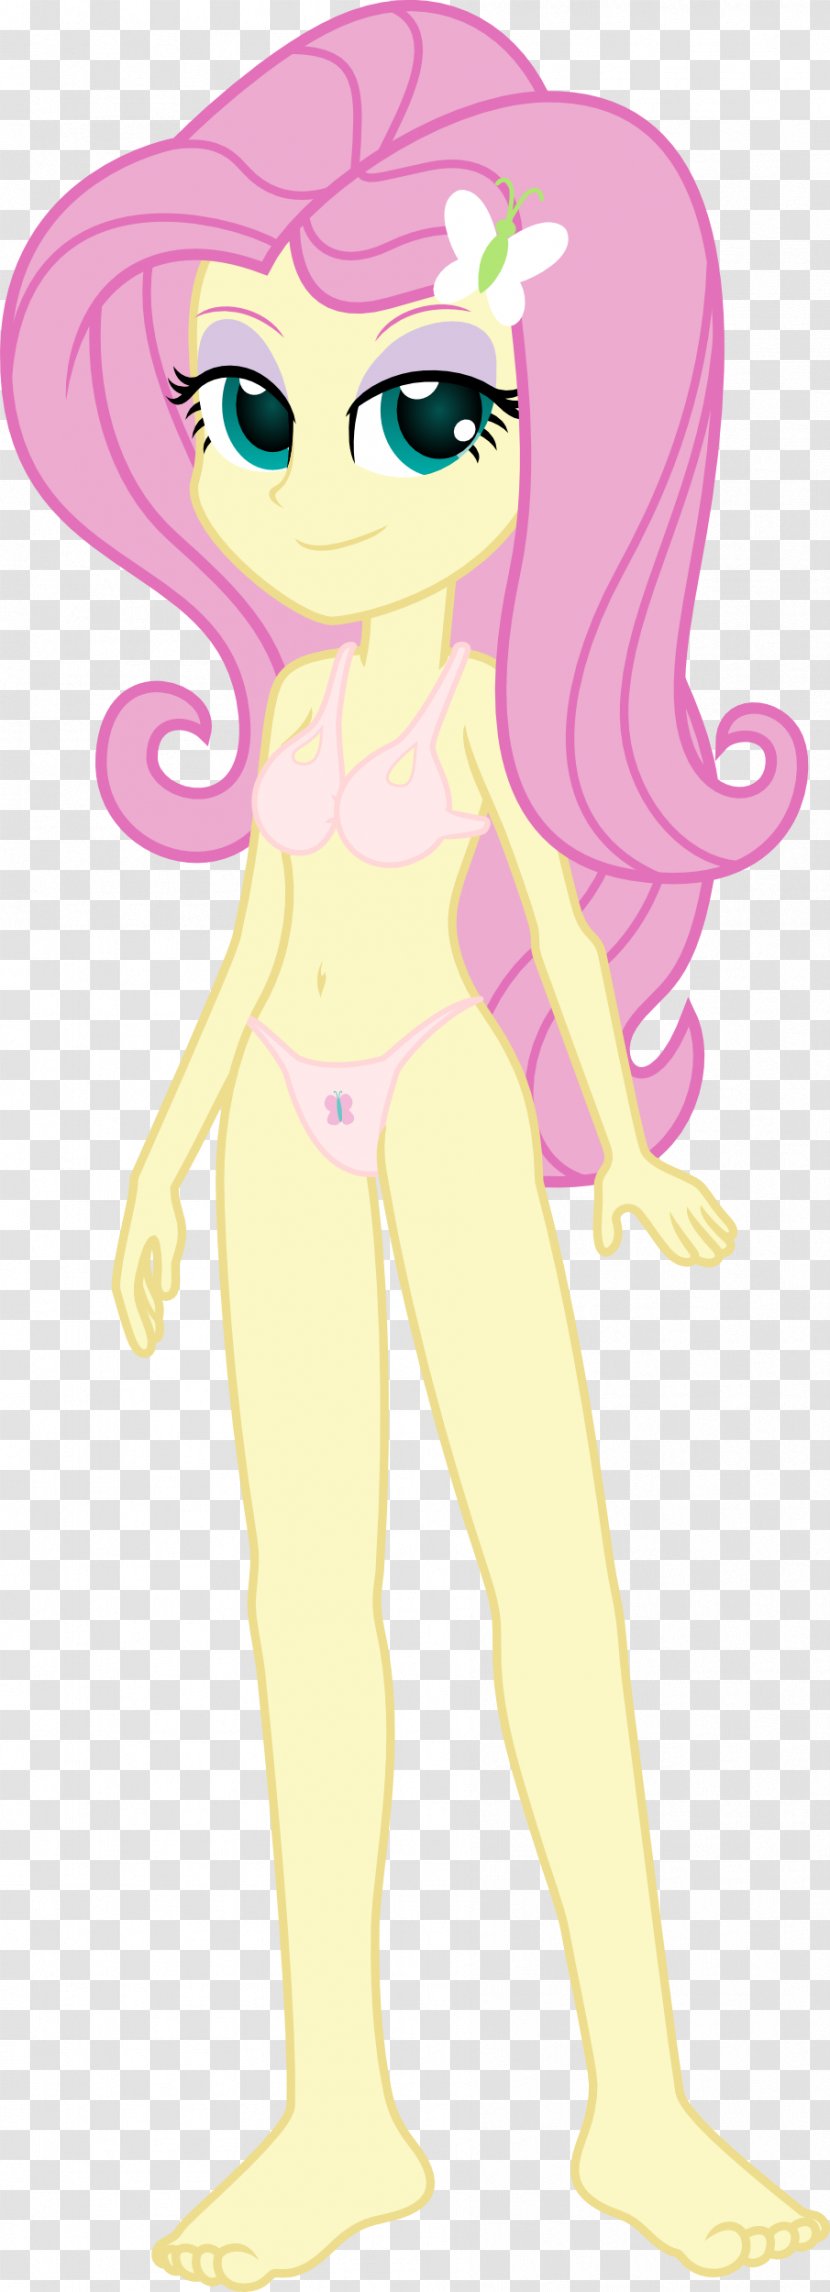 Fluttershy Pinkie Pie Pony Clothing Rarity - Tree - Compare Romeo And Juliet Suicide Transparent PNG